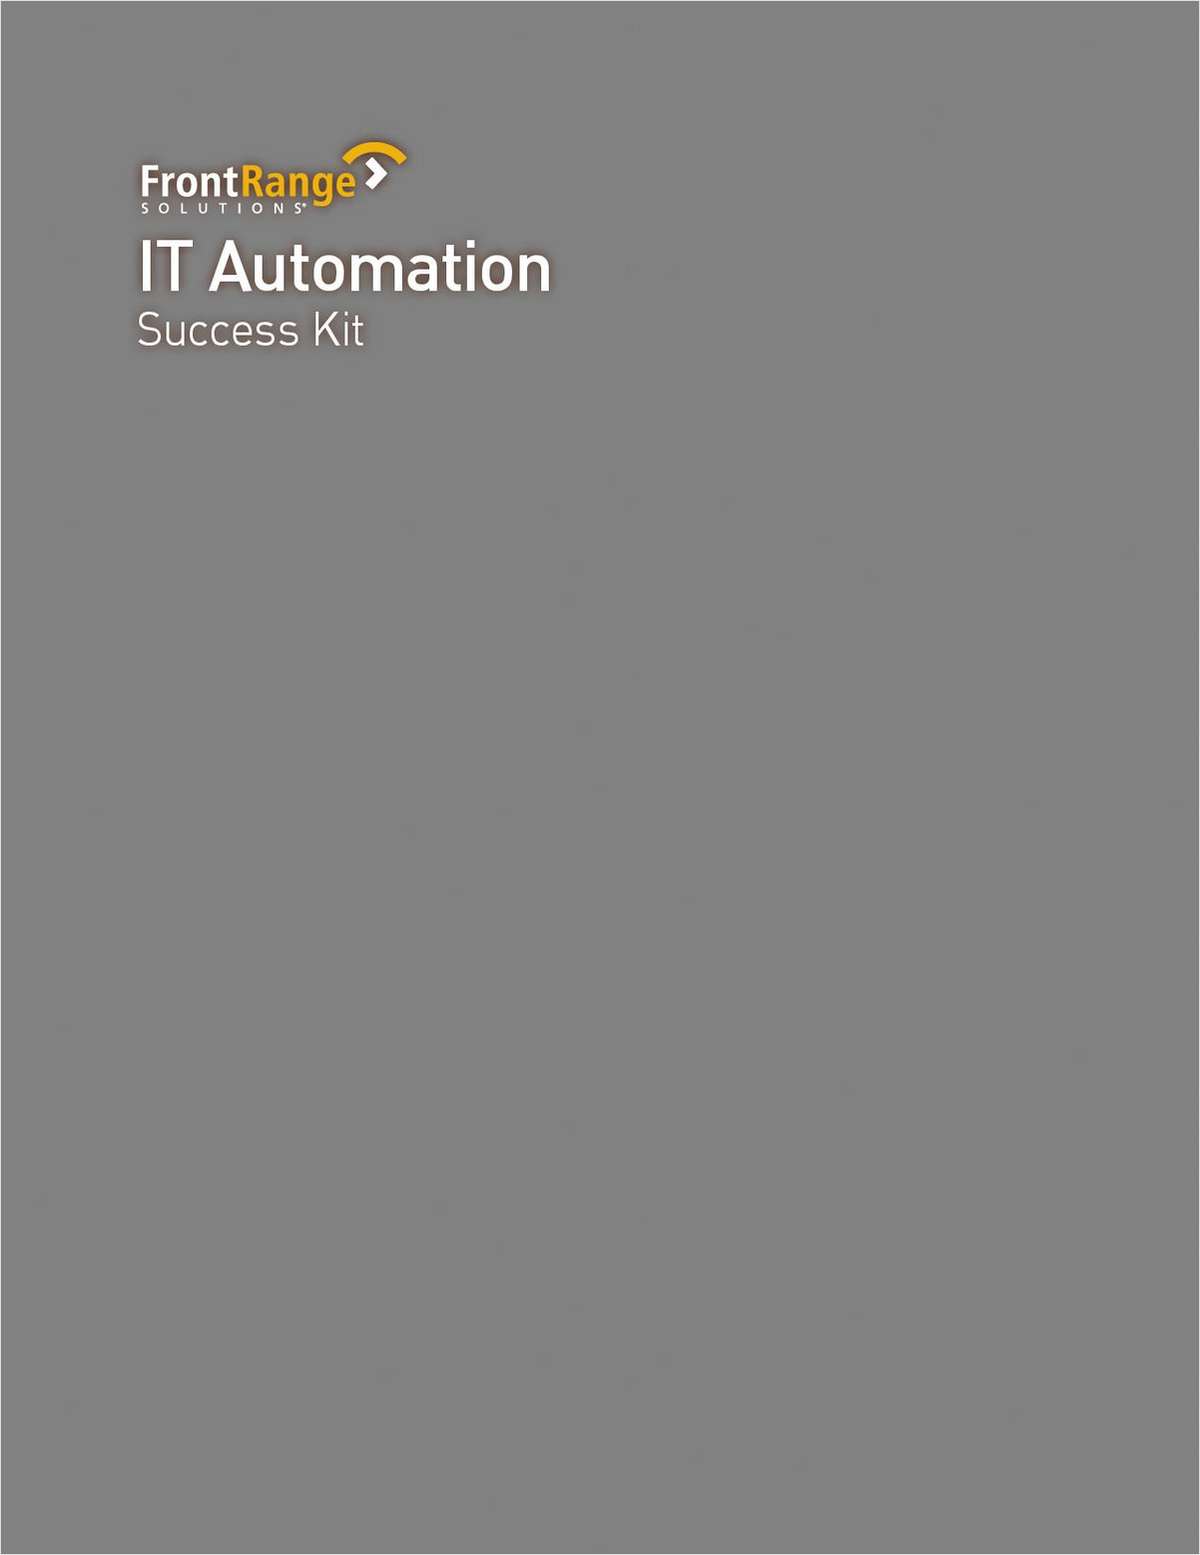 IT Automation for IT DecisionMakers